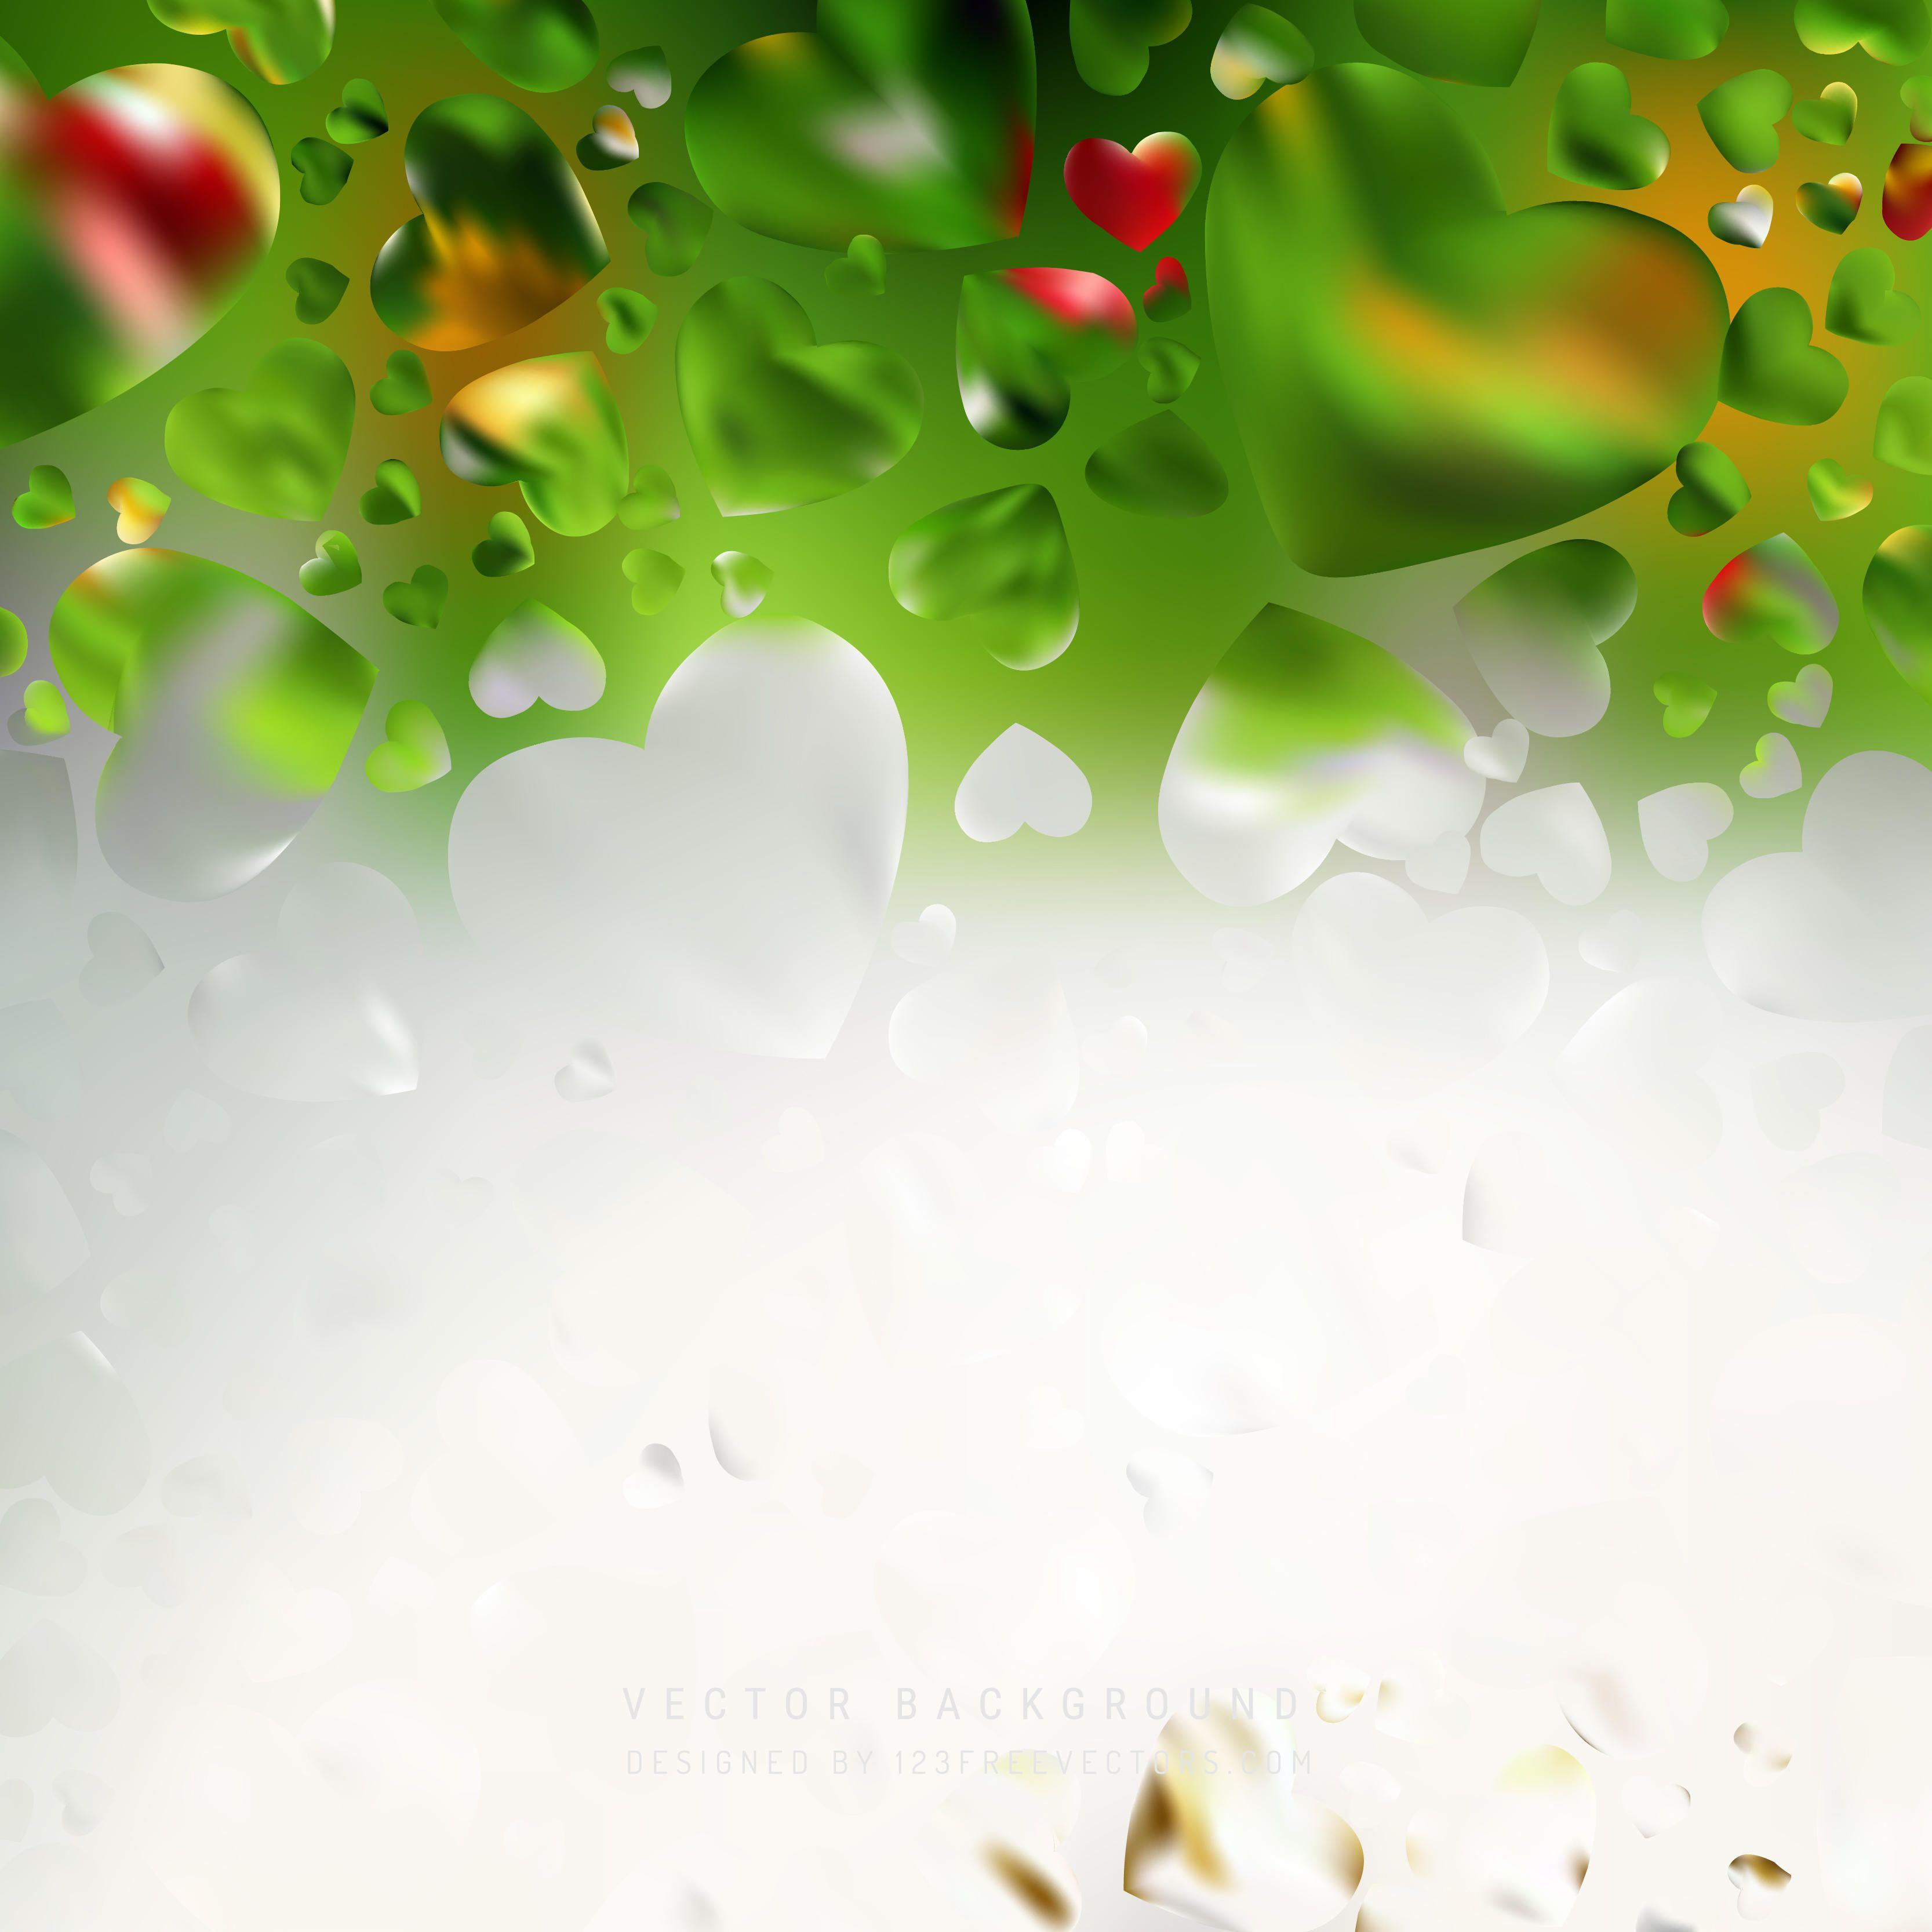 White and Green Background Vectors. Download Free Vector Art